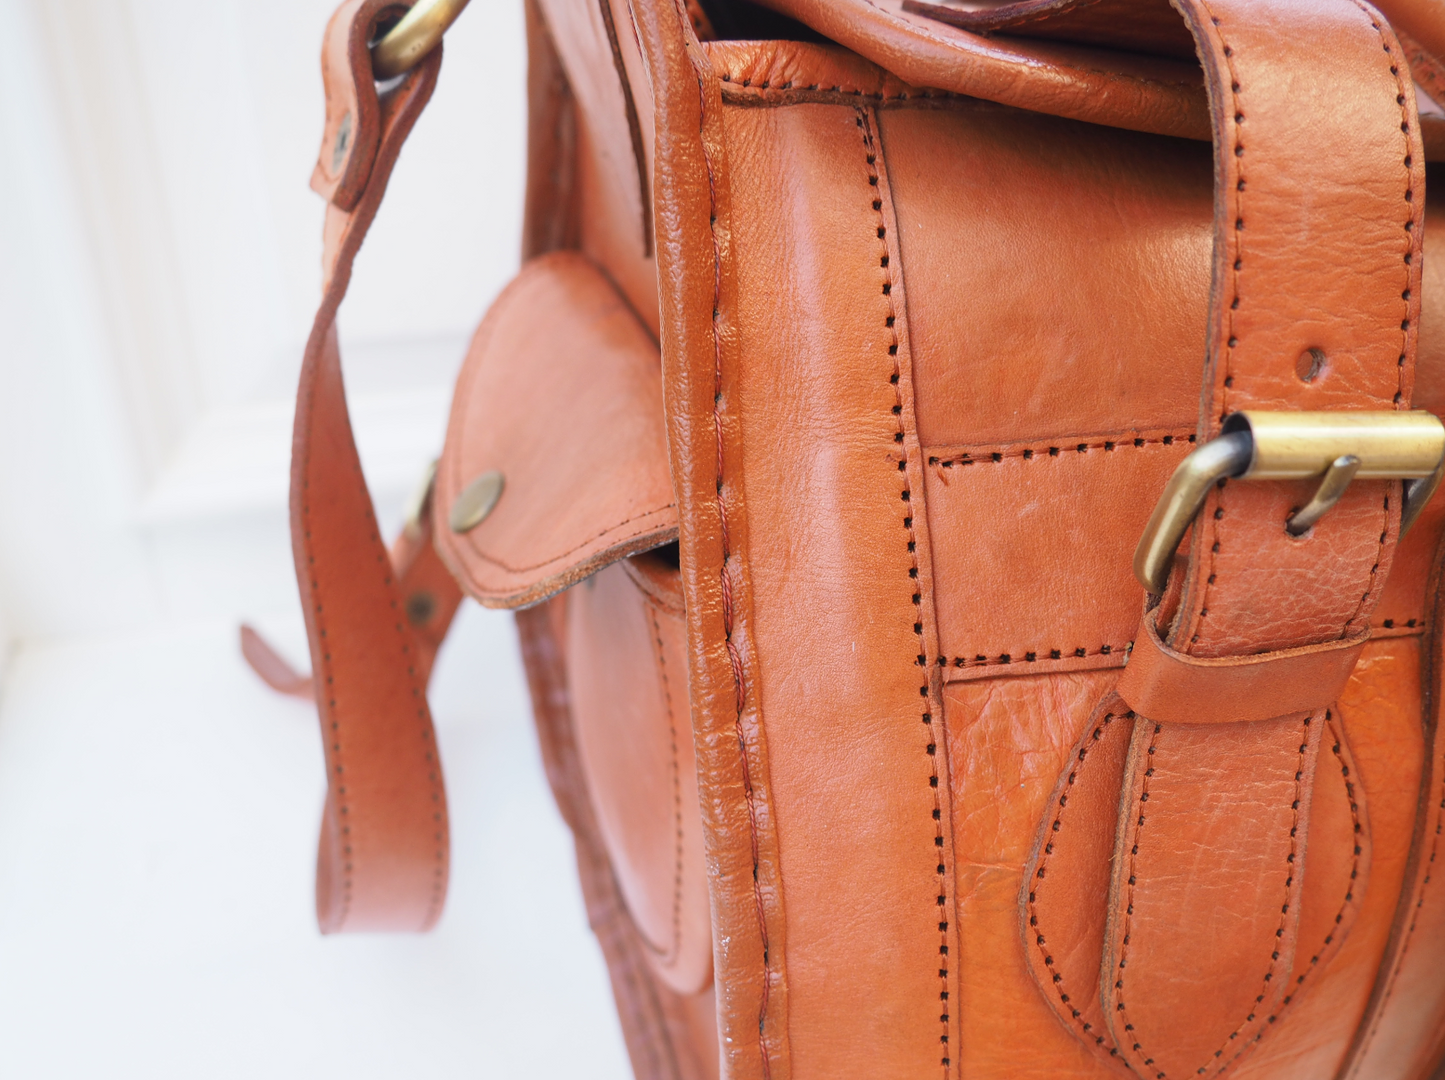 GENUINE LEATHER- HAND MADE AUTHENTIC SADDLE BAG.